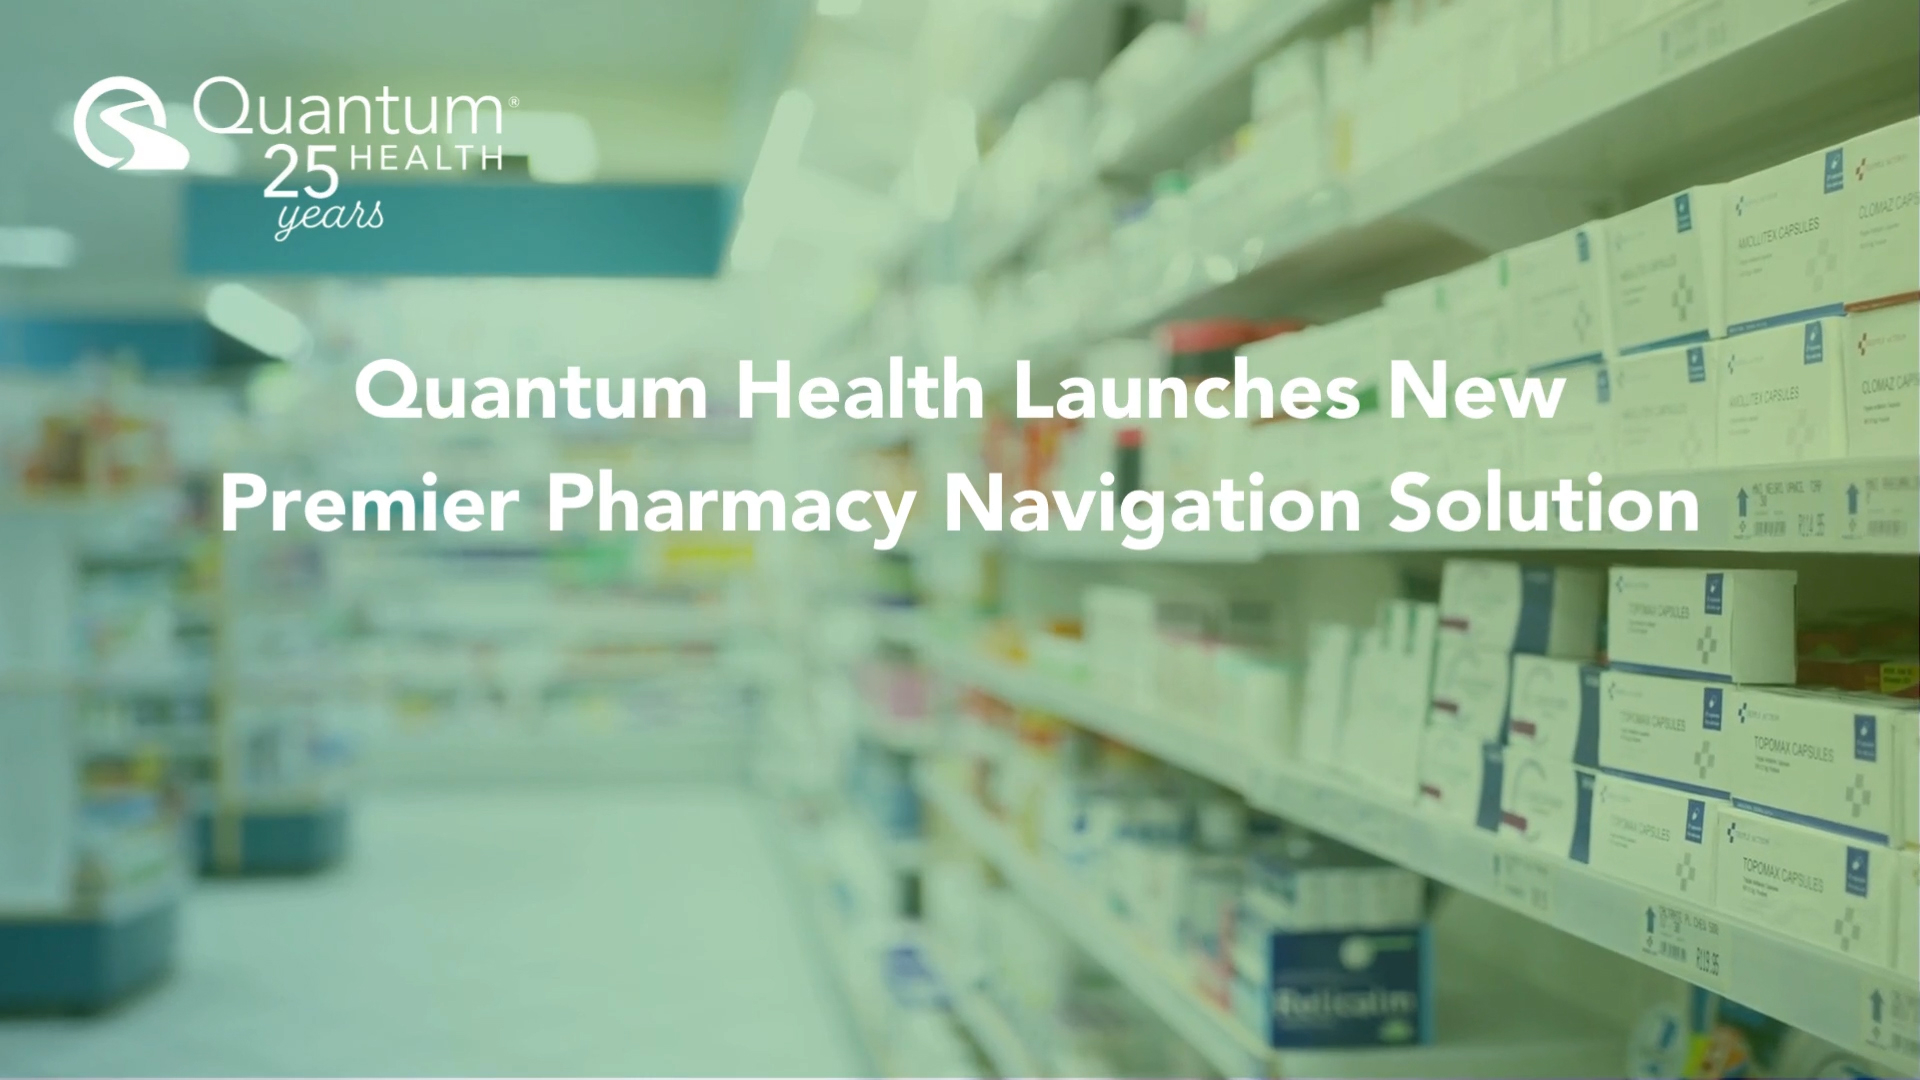 Quantum Health announces its expanded specialty pharmacy services designed to continue helping self-insured employers and plan members save money.